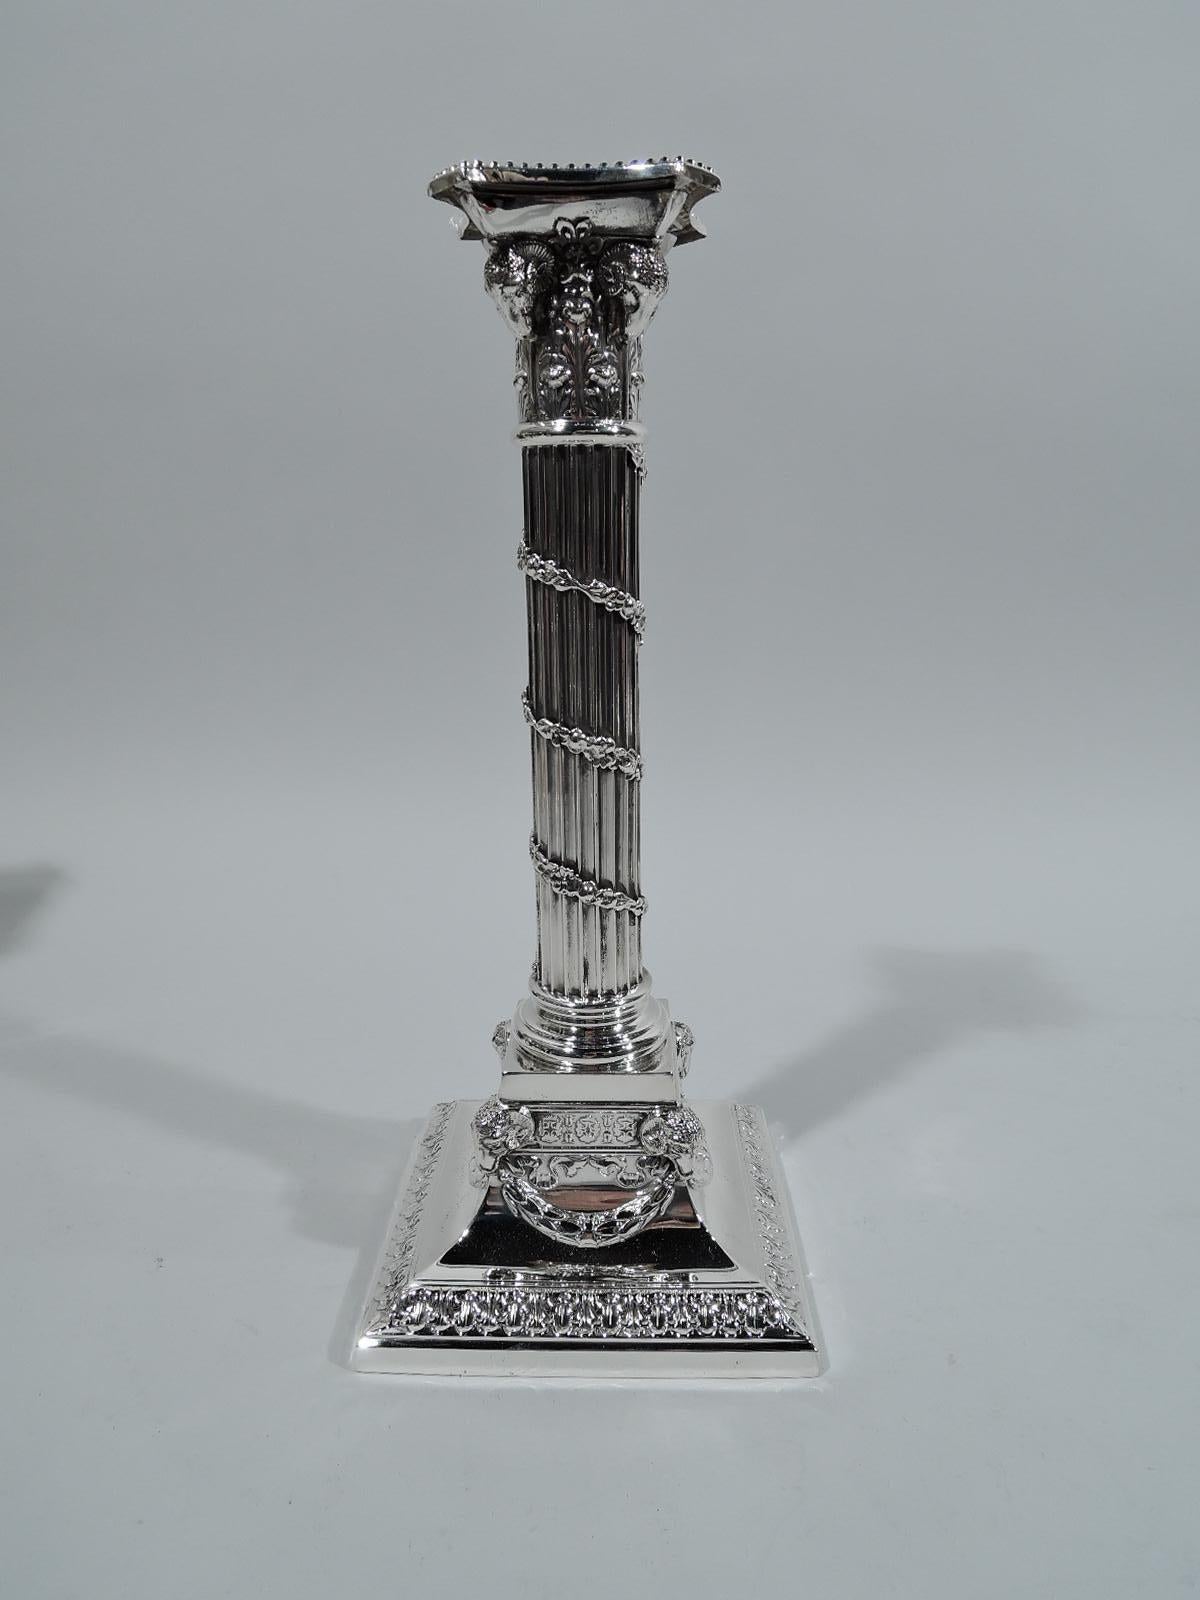 Pair of Edwardian neoclassical sterling silver candlesticks. Made by Mauser in New York, circa 1910. Each: Fluted column with descending wraparound garland. Composite Corinthian capital with ram’s heads. More ram’s heads applied to square base